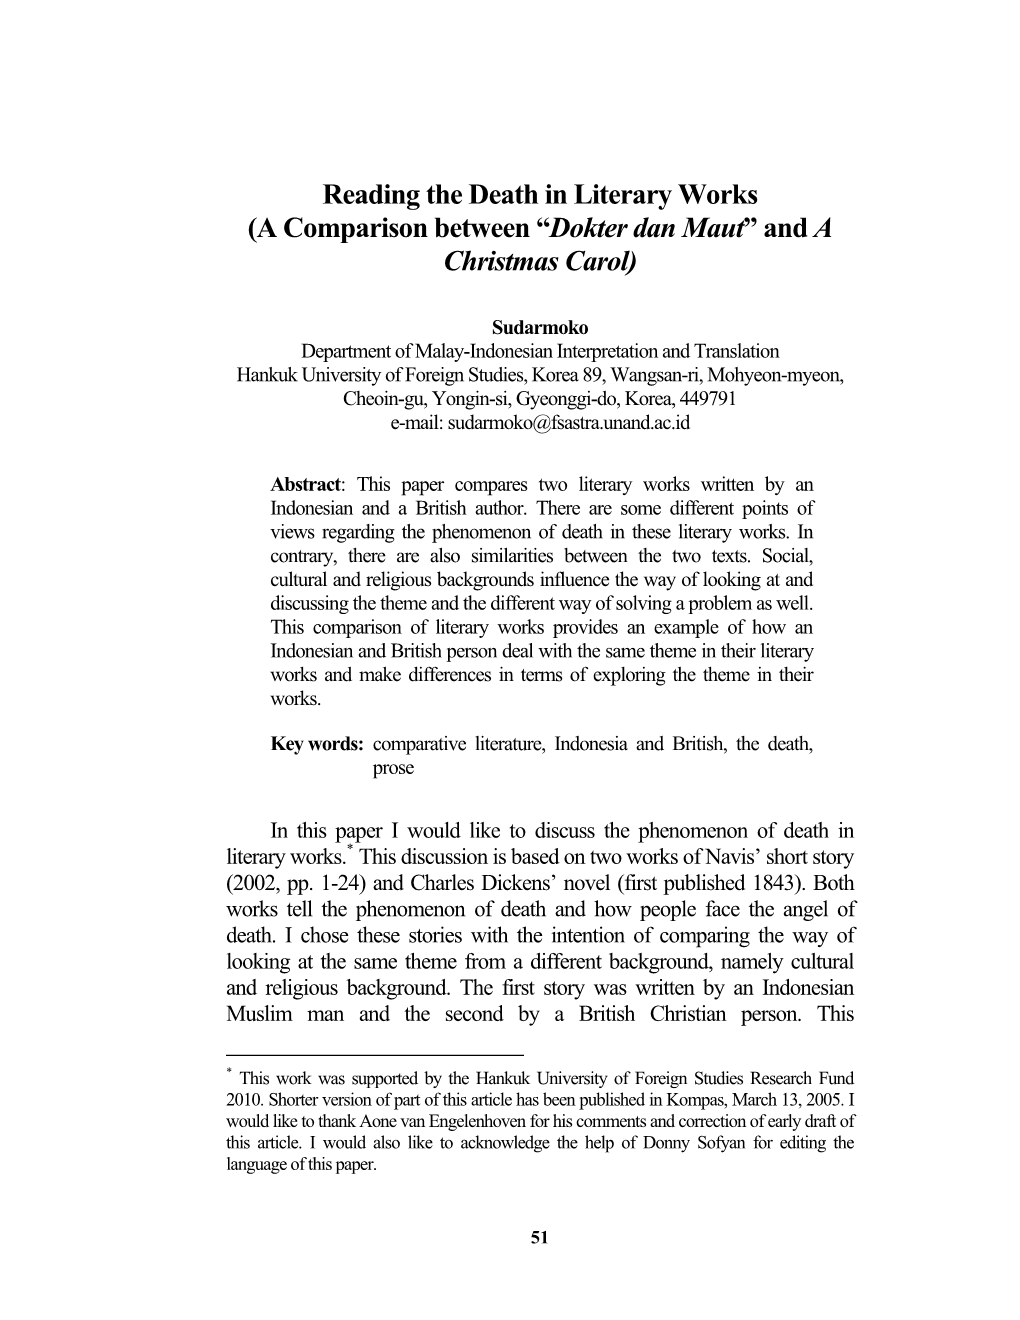 Reading the Death in Literary Works (A Comparison Between “Dokter Dan Maut” and a Christmas Carol)